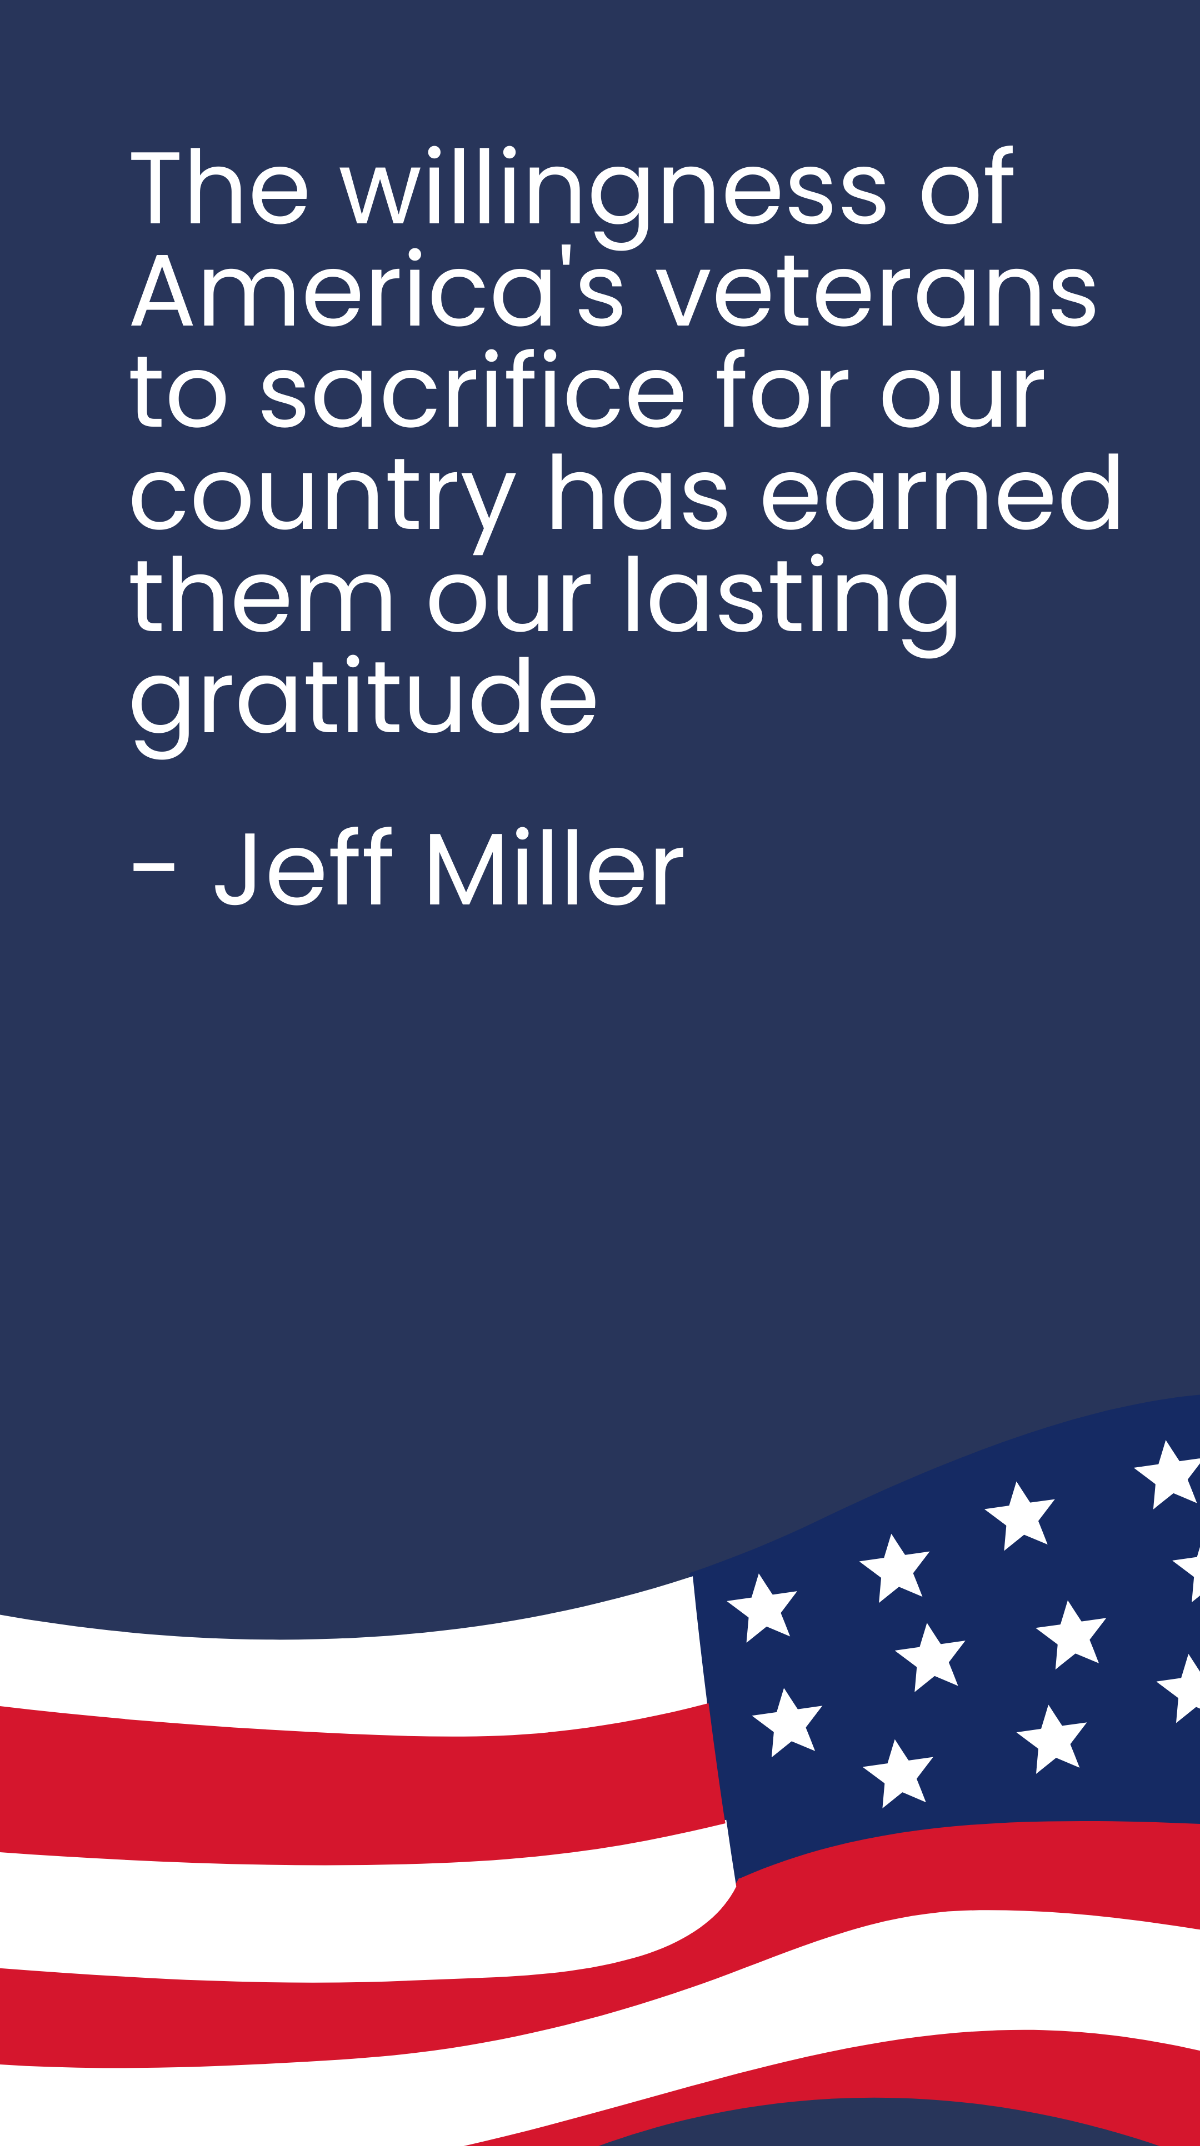 Free Jeff Miller - The willingness of America's veterans to sacrifice for our country has earned them our lasting gratitude Template